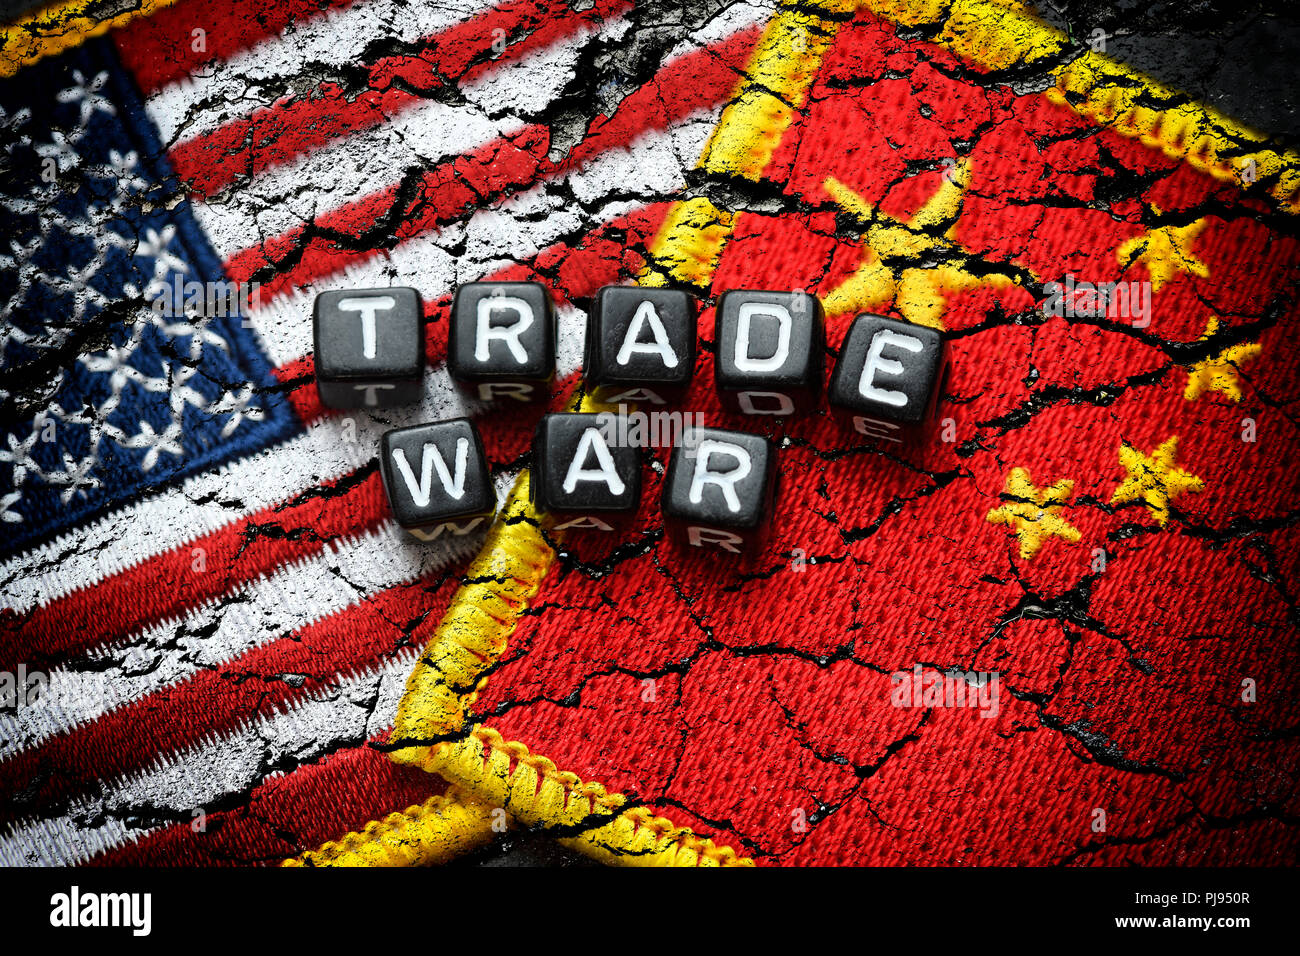 Flags of the USA and China with the stroke Trade Being, commercial war, Flaggen von USA und China mit dem Schriftzug Trade War, Handelskrieg Stock Photo